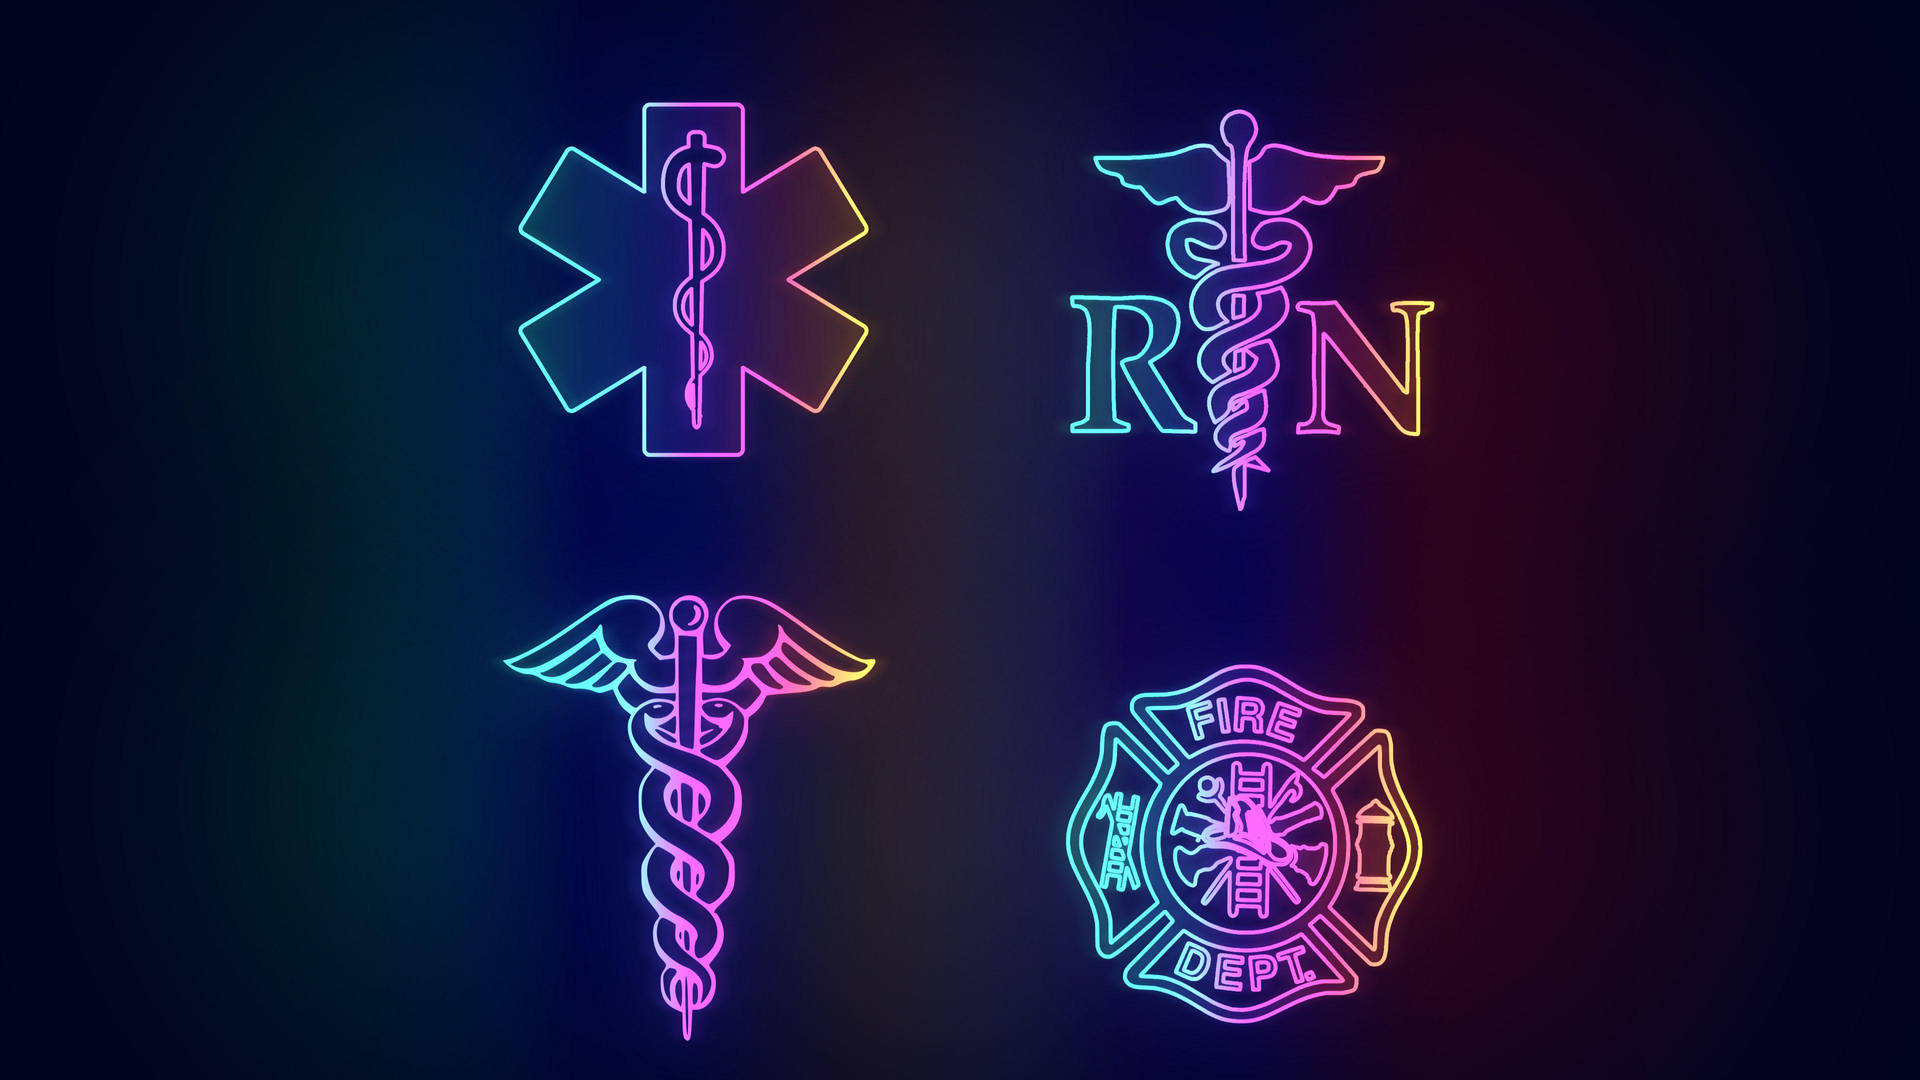 Neon Medical Symbol Collection Wallpaper